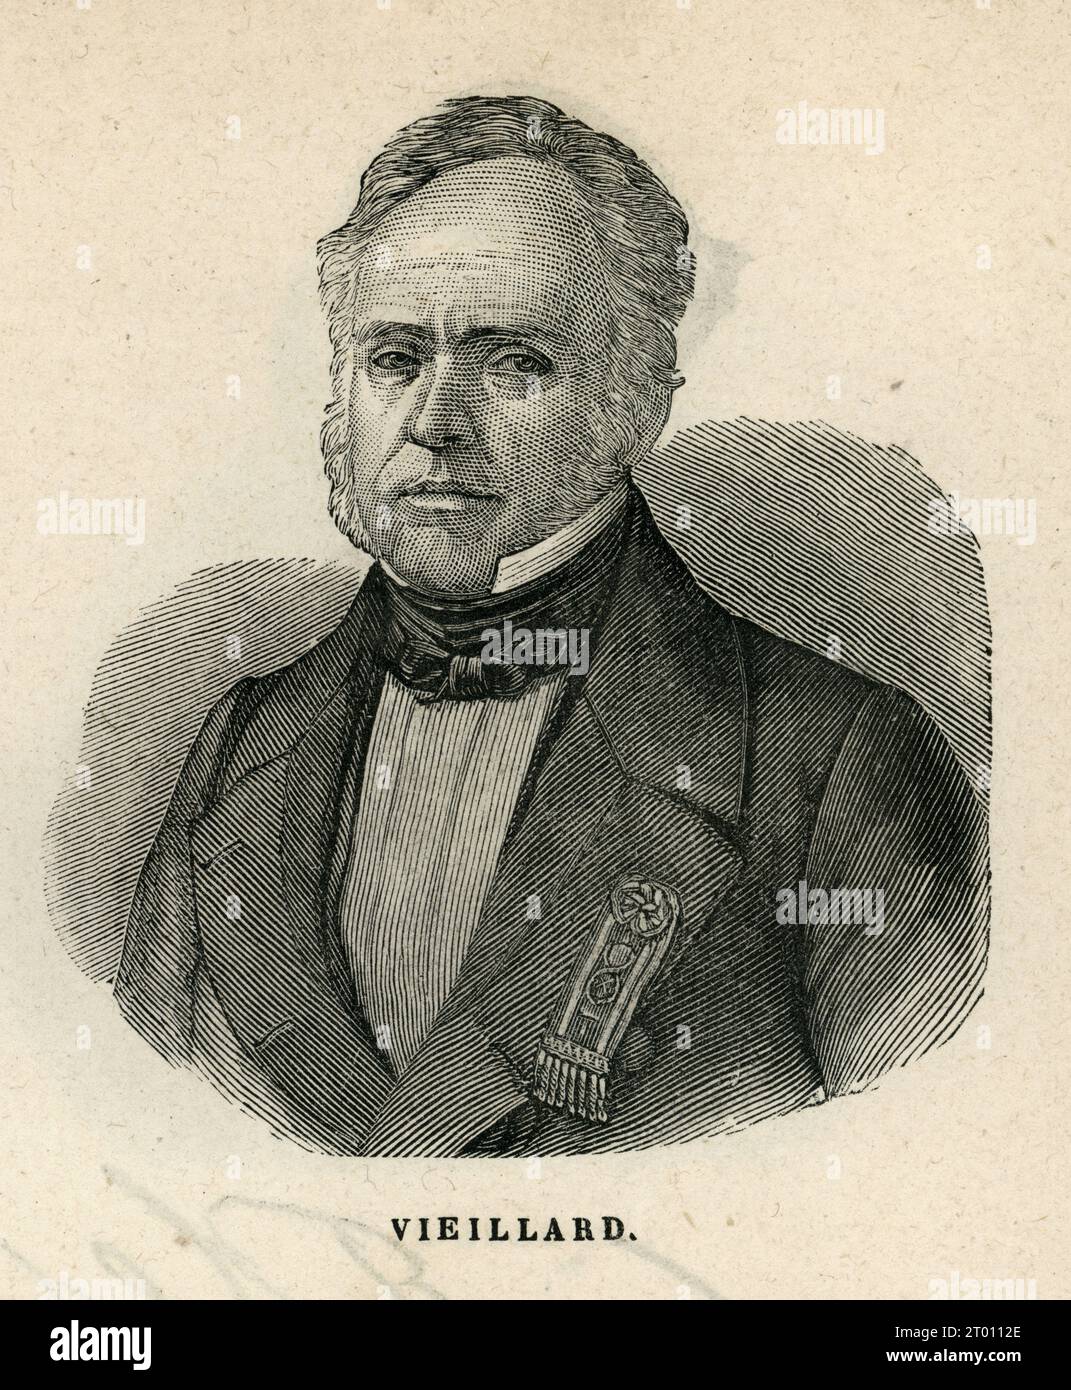 Portrait of Narcisse Vieillard.  Illustration from 'Histoire d'un crime' ('The History of a Crime', written in 1852) and part of a set of engravings published in Victor Hugo's 'Oeuvres'. Book published in French by Eugène Hugues in 1879. Stock Photo